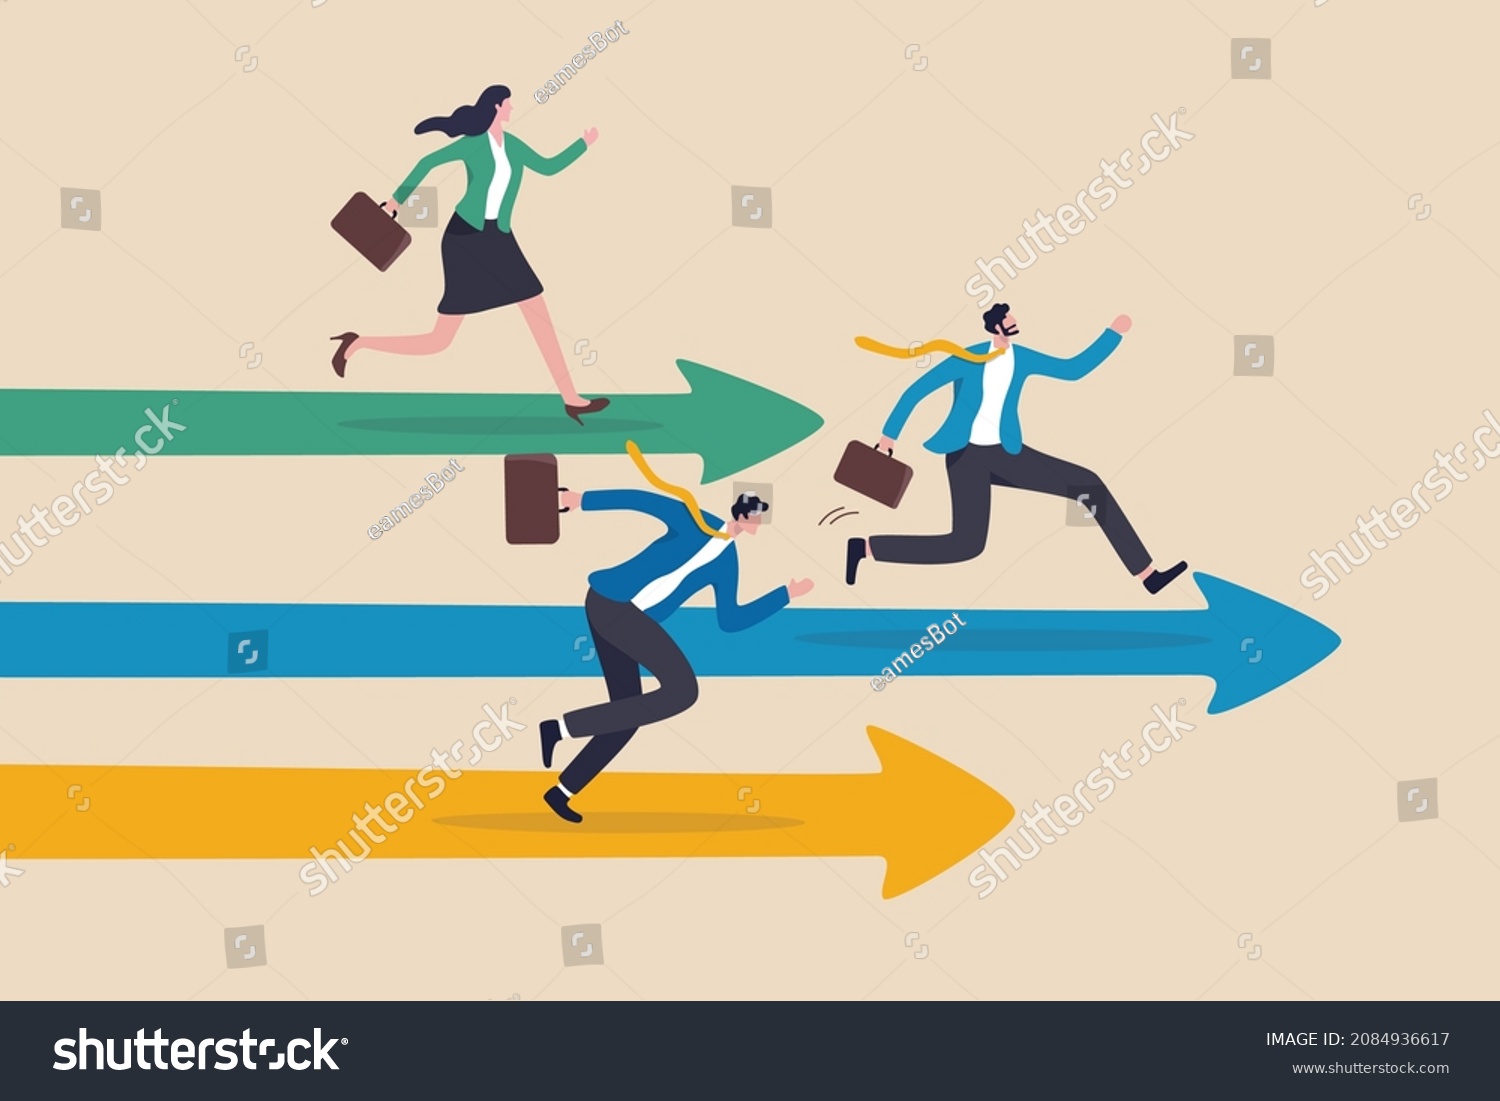 SVG of Business competition, contest or rivalry against competitors to increase sales for victory, performance compare to other employees concept, businessman and woman compete running on arrow racetrack. svg